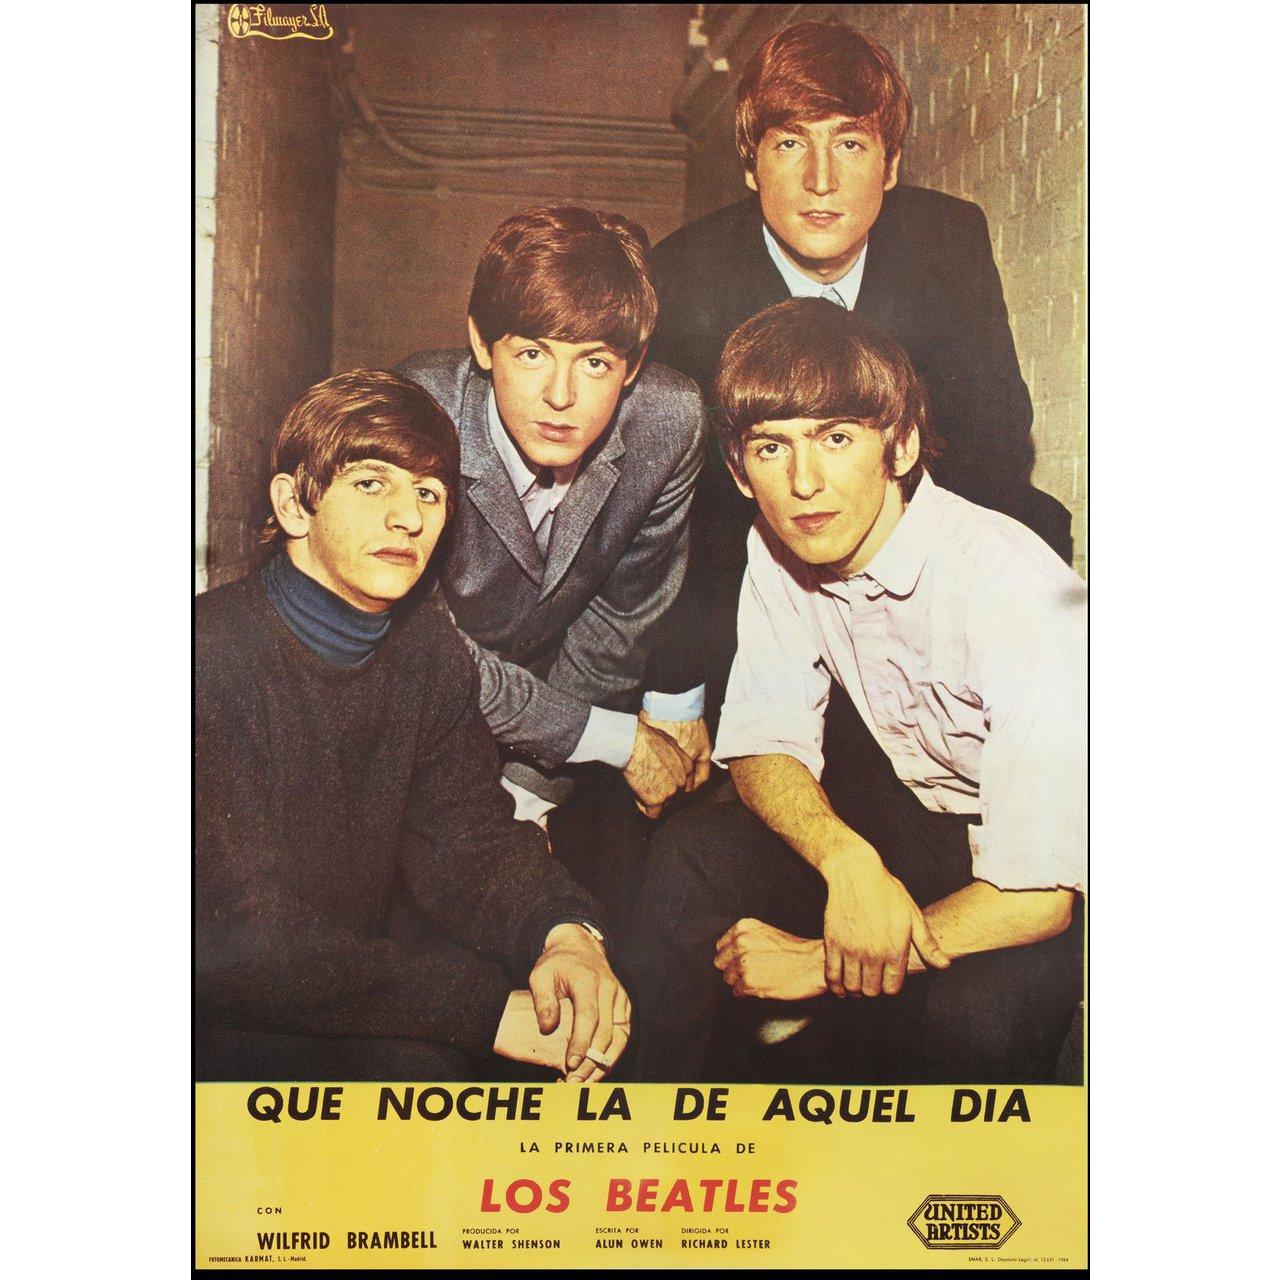 Original 1964 Spanish B1 poster for the film A Hard Day's Night directed by Richard Lester with The Beatles / John Lennon / Paul McCartney / George Harrison. Fine condition, linen-backed. This poster has been professionally linen-backed. Please